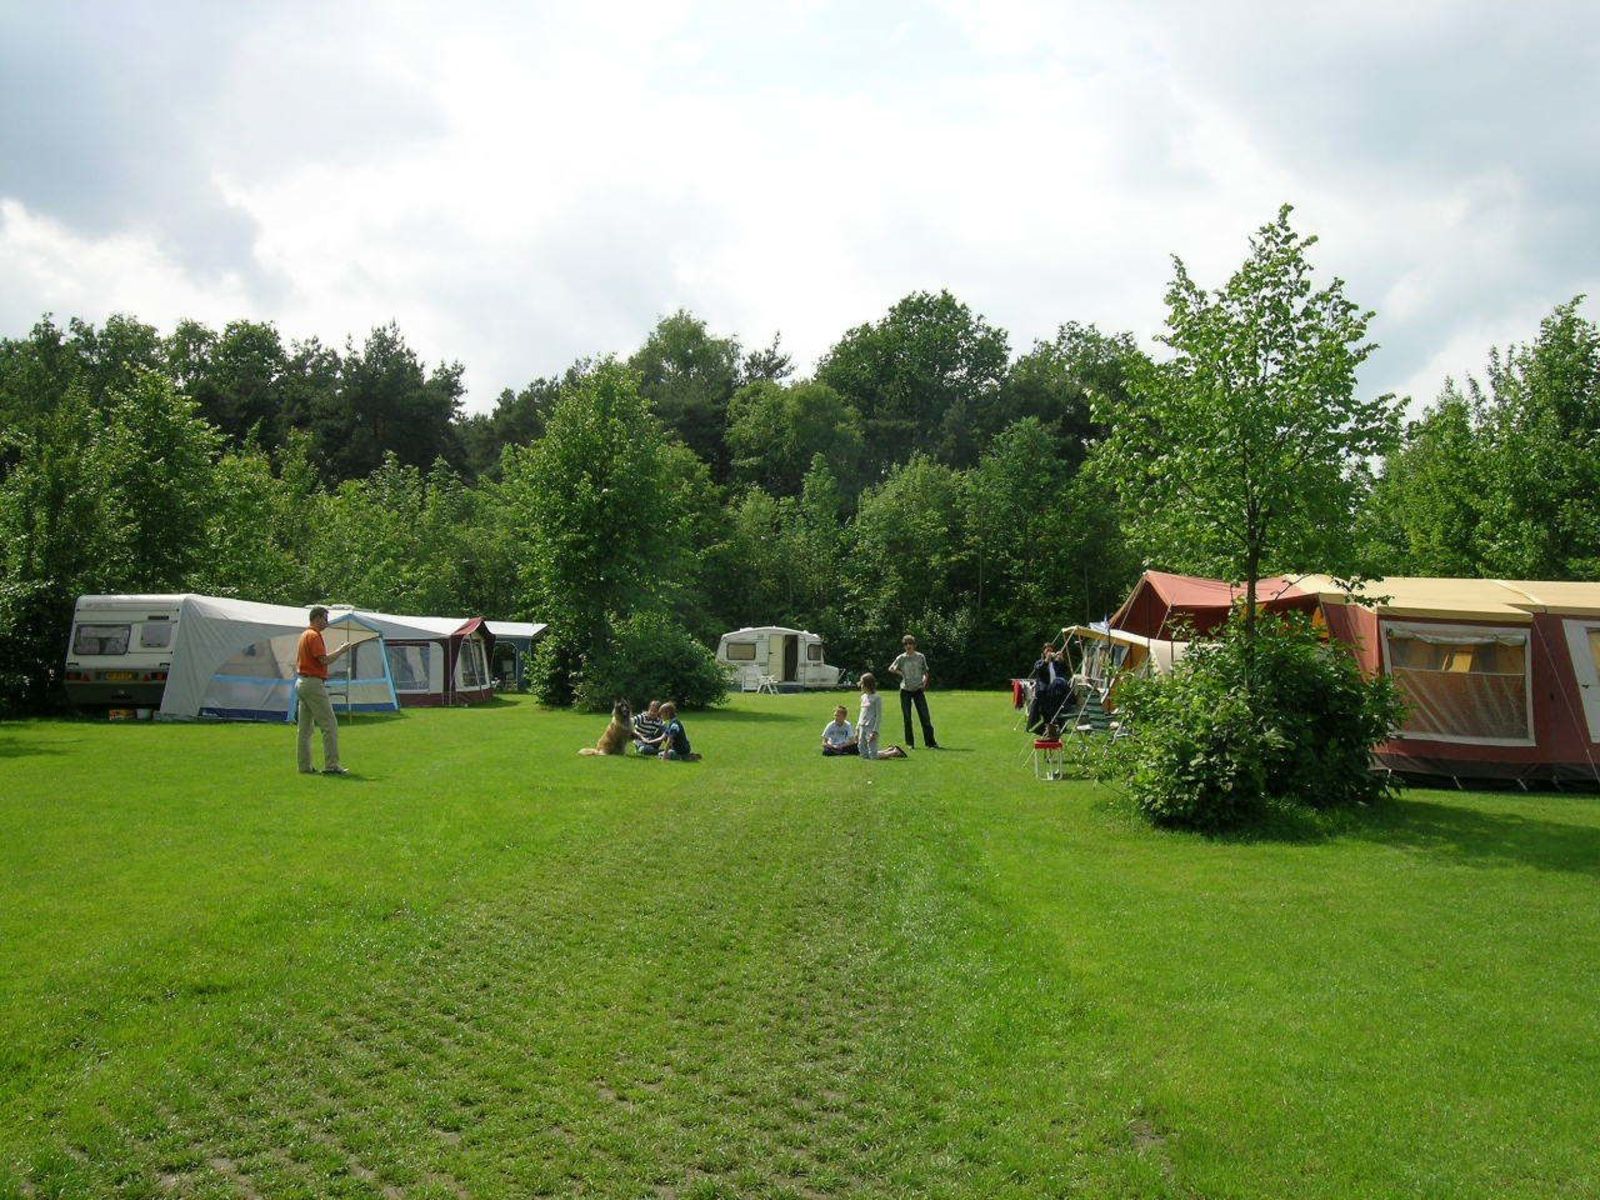 Camping pitch incl. 2 persons, excl. water/electricity